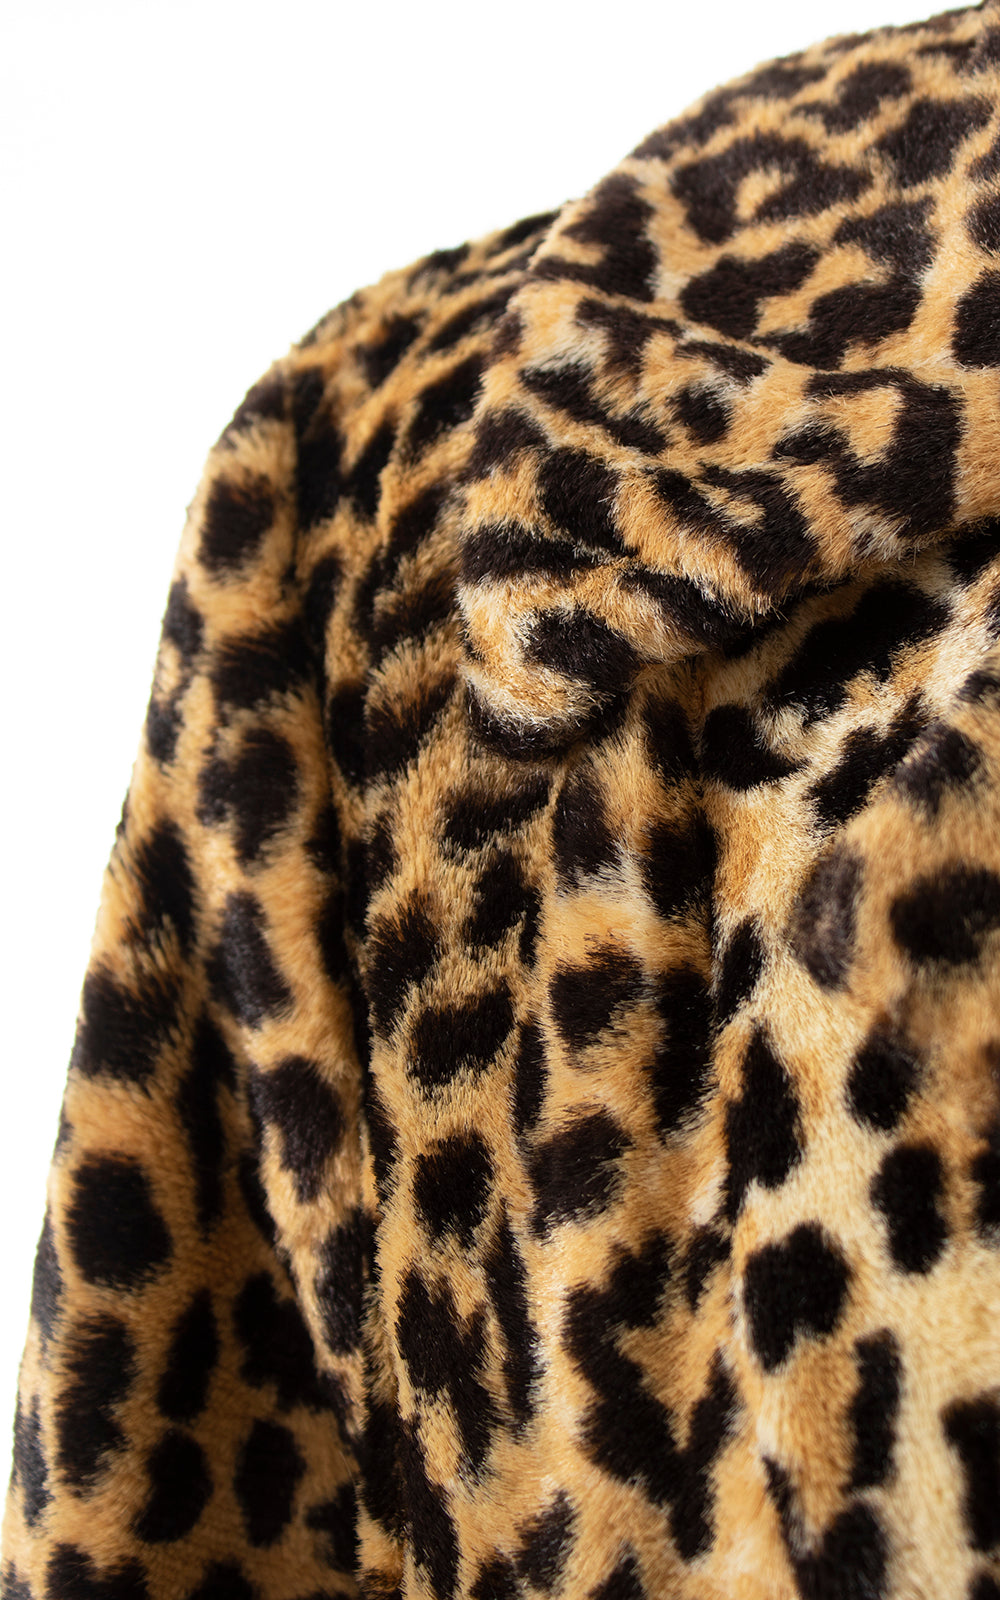 1960s 1970s Leopard Print Faux Fur Coat with Quilted Lining | large/x-large